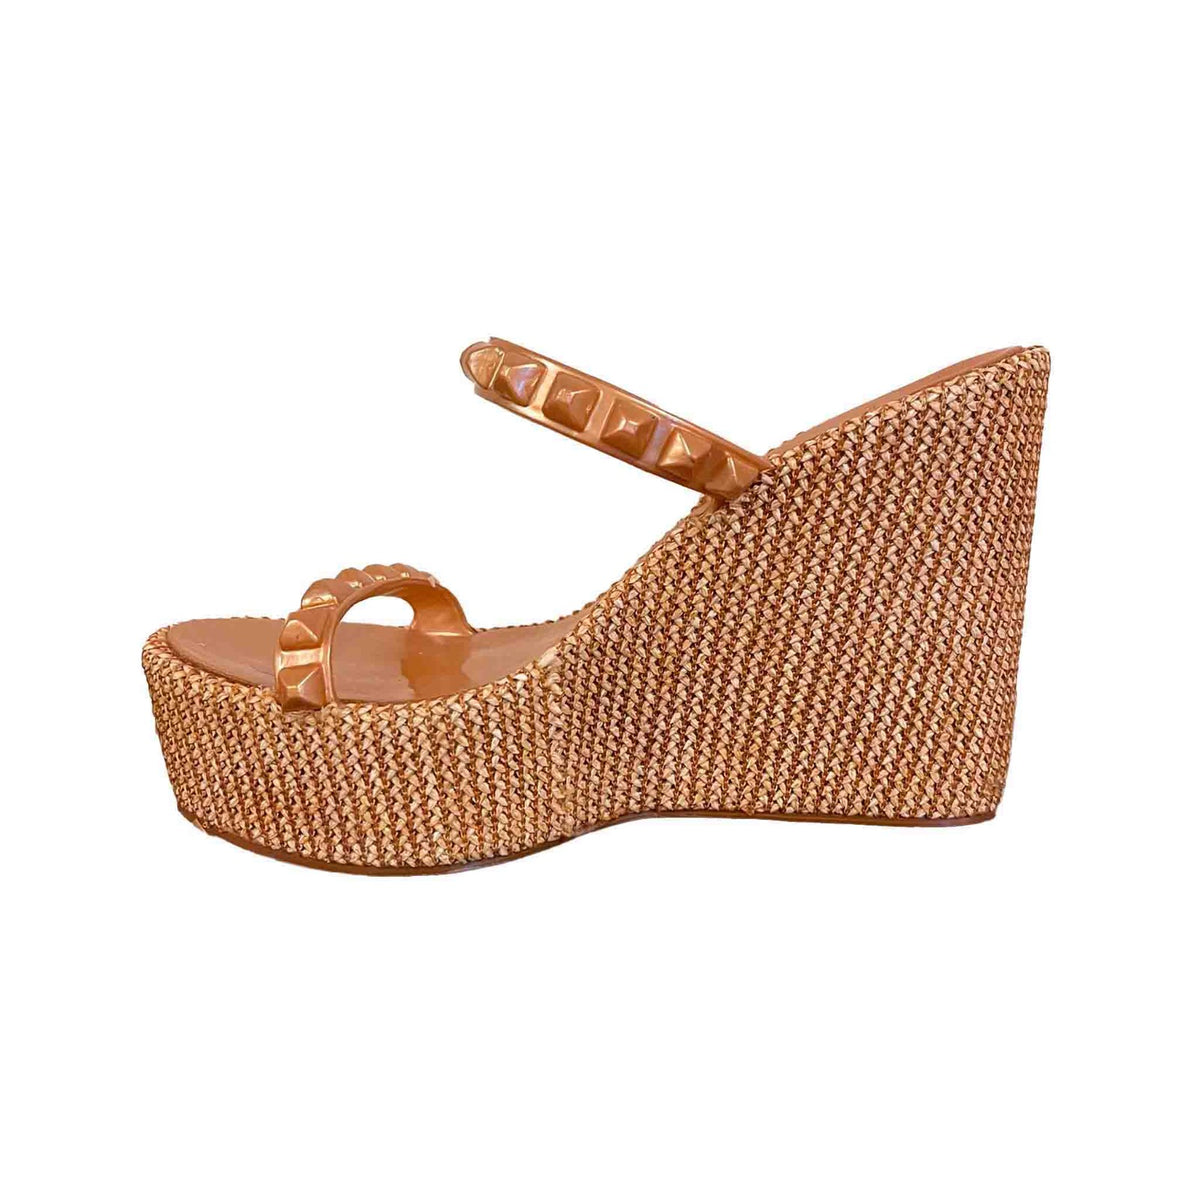 Melissa Shoe Rose Gold in color wedges elevate any outfit while maintaining a laid-back vacation vibe